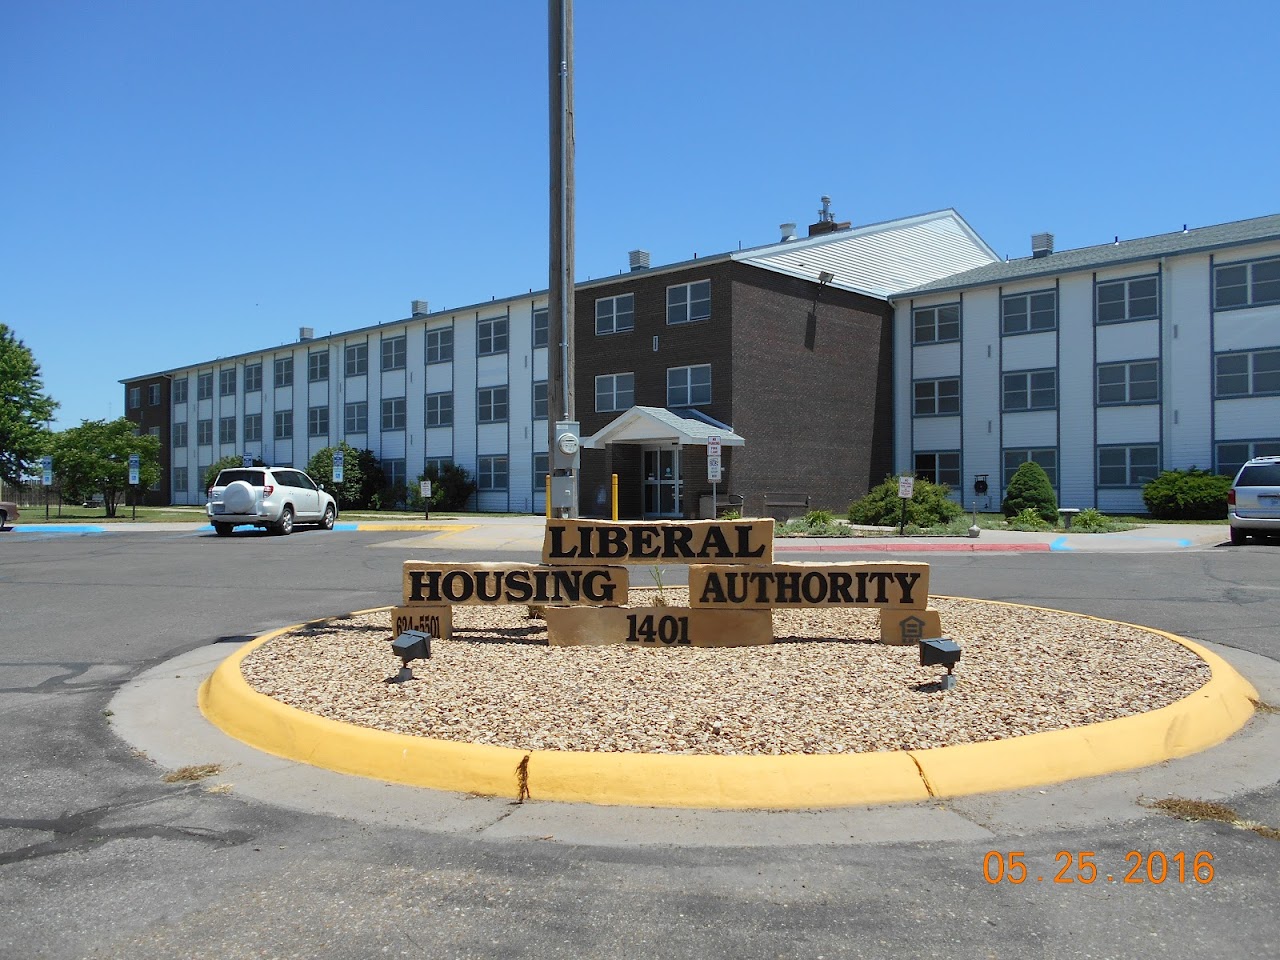 Photo of Liberal Housing Authority. Affordable housing located at 1401 N NEW YORK Avenue LIBERAL, KS 67901